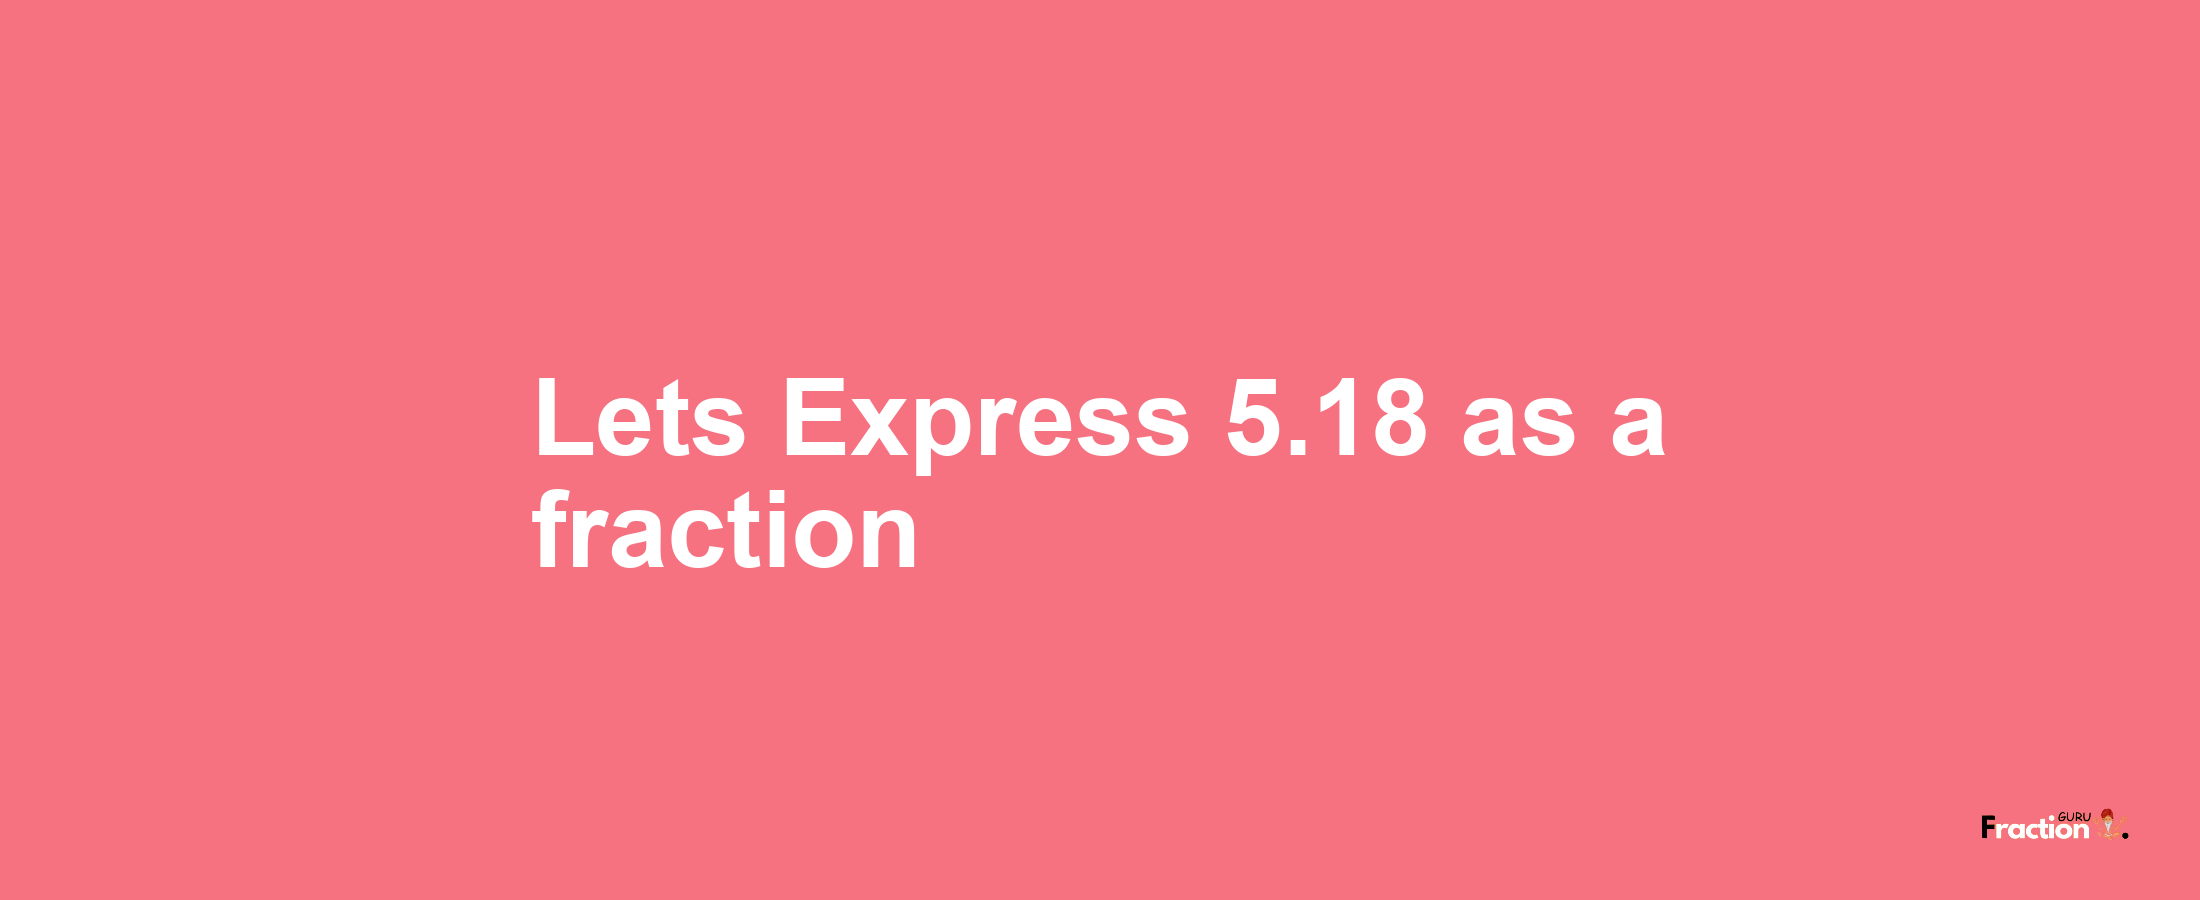 Lets Express 5.18 as afraction